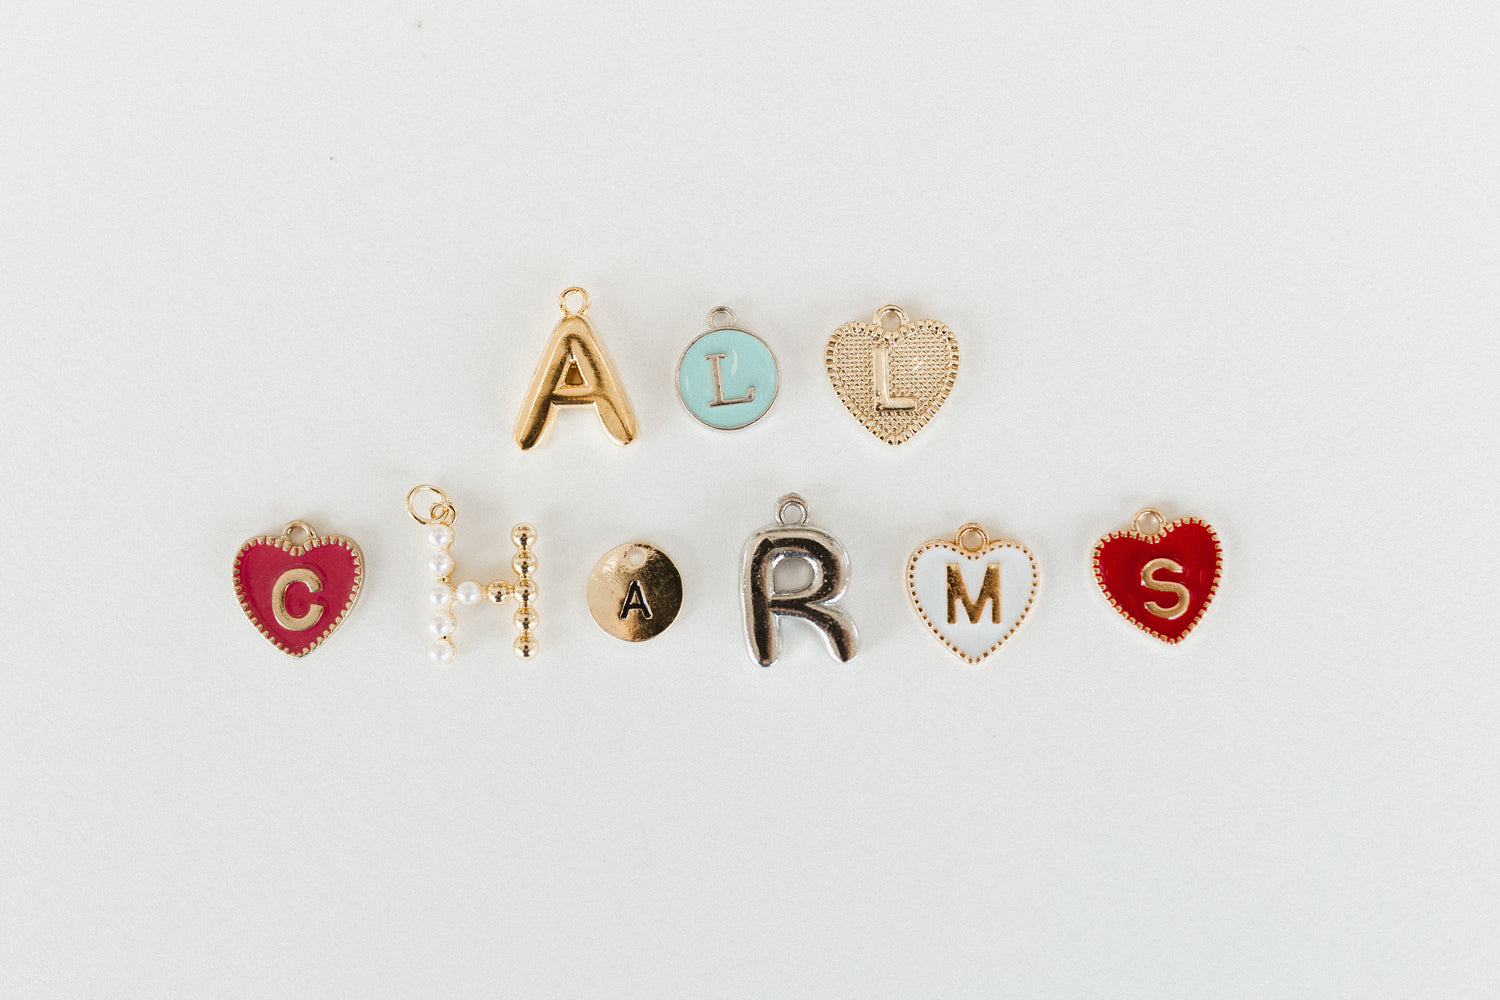 All Charms